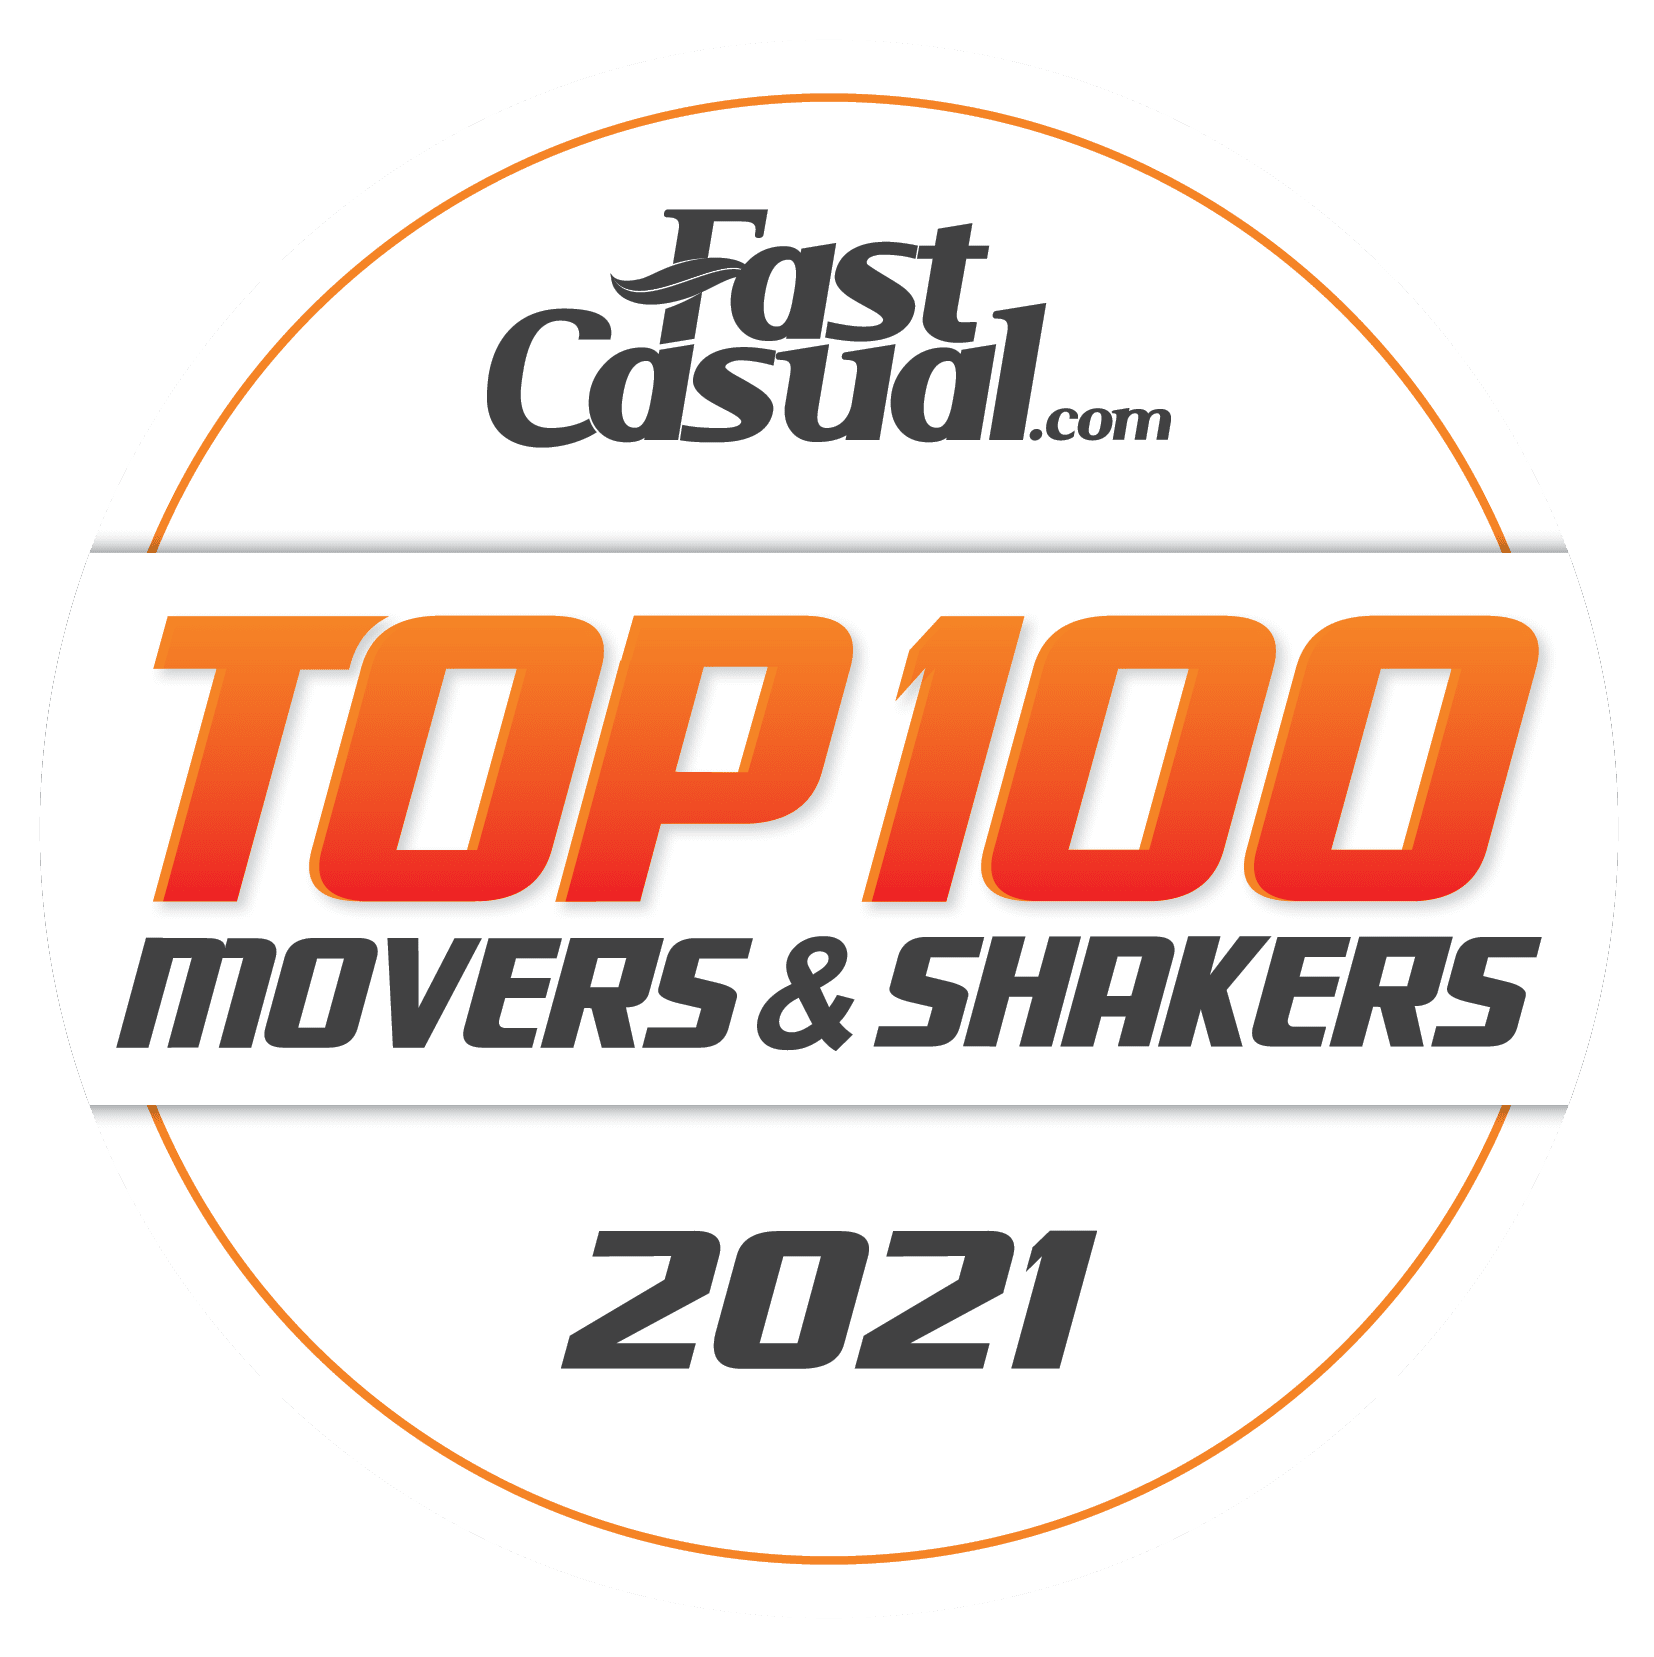 Movers & Shakers 2021